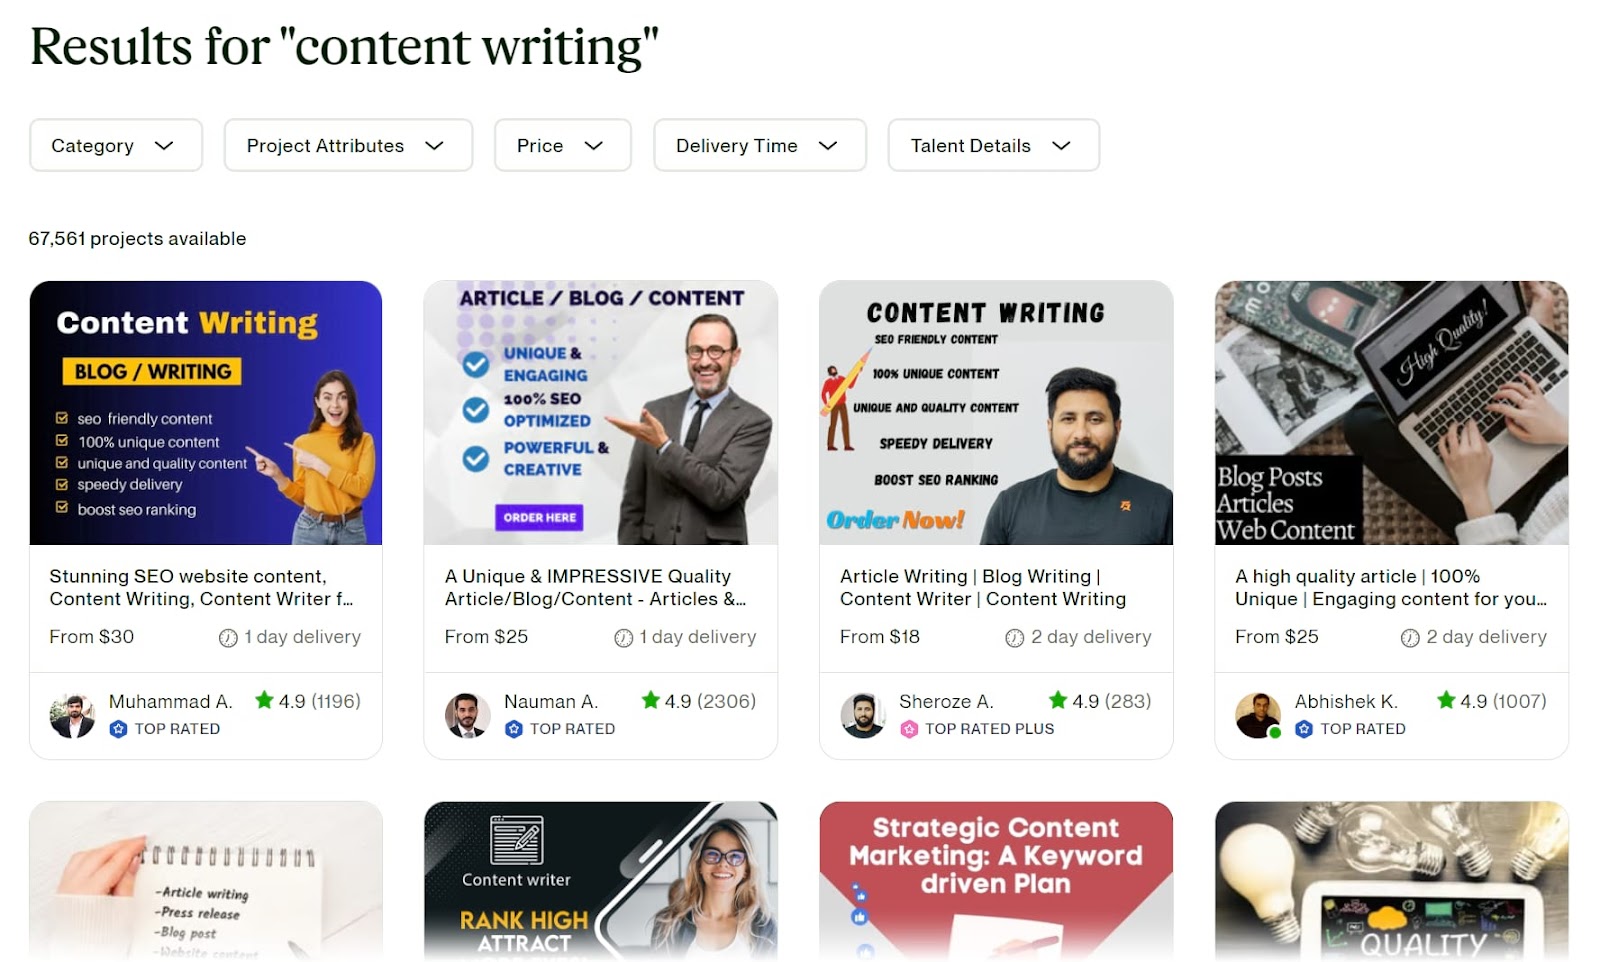 Results for "content writing" page in Upwork, showing a list of pre-defined projects offered by freelancers and agencies